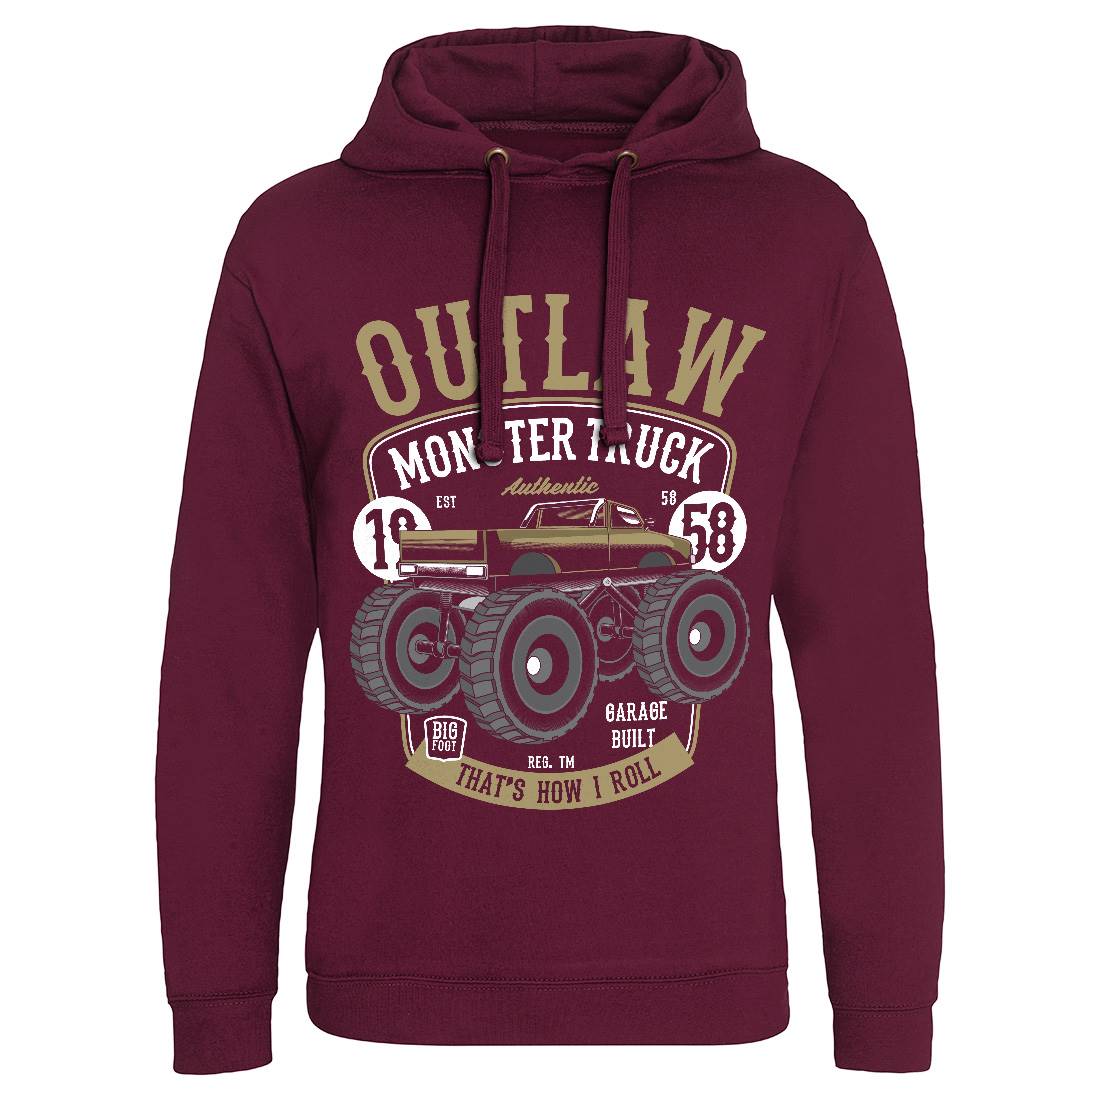 Outlaw Monster Truck Mens Hoodie Without Pocket Vehicles C408